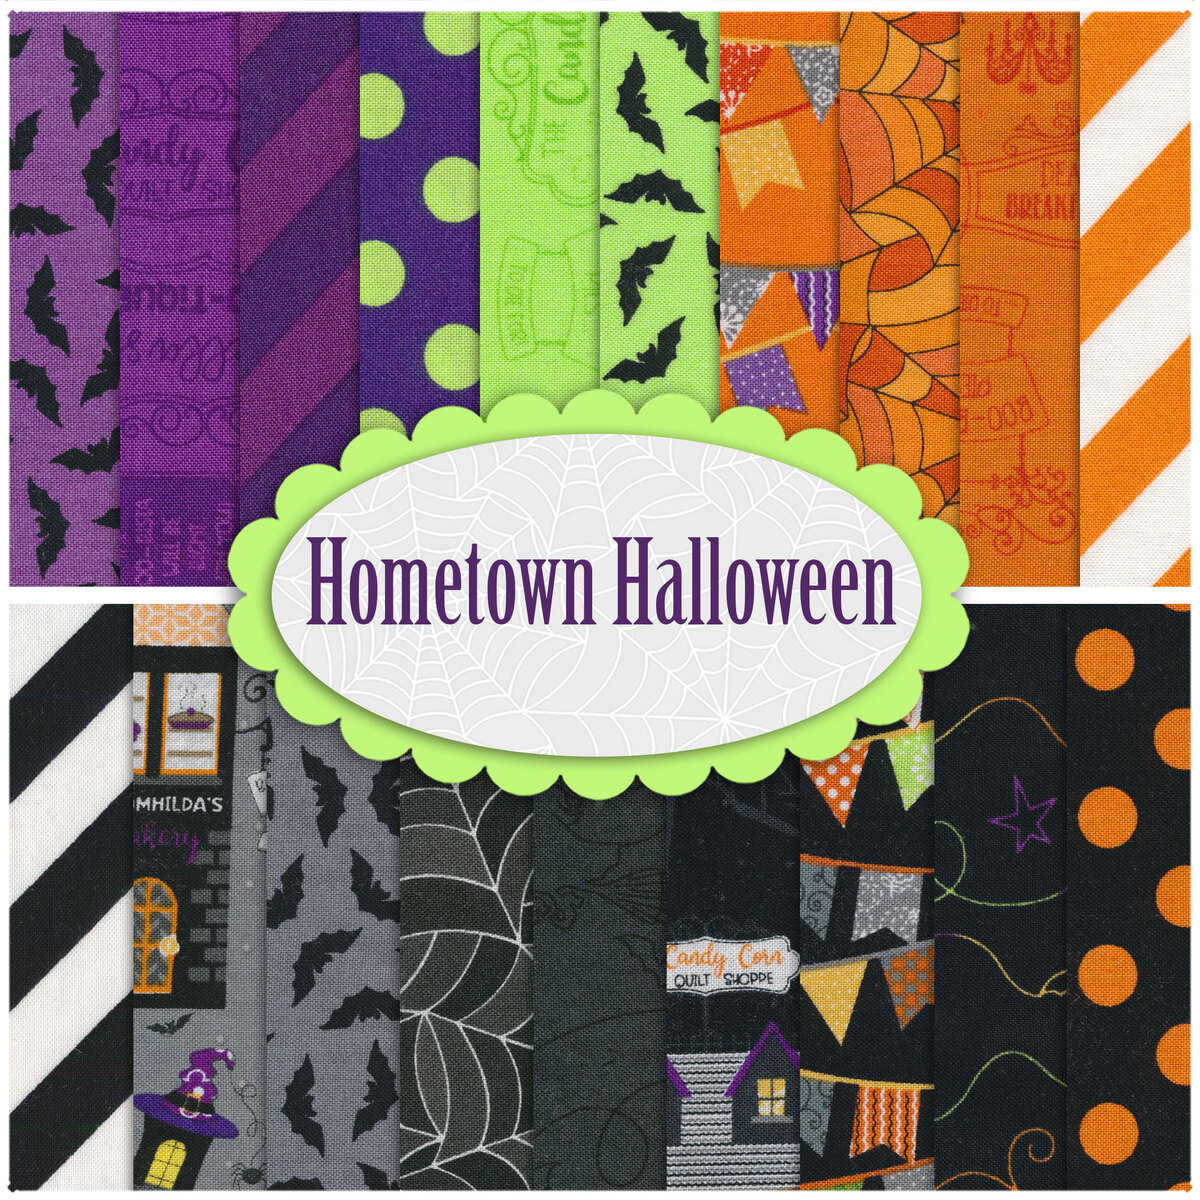 Hometown Halloween Fabric Collection by Maywood Fabrics 42 5 fabric squares